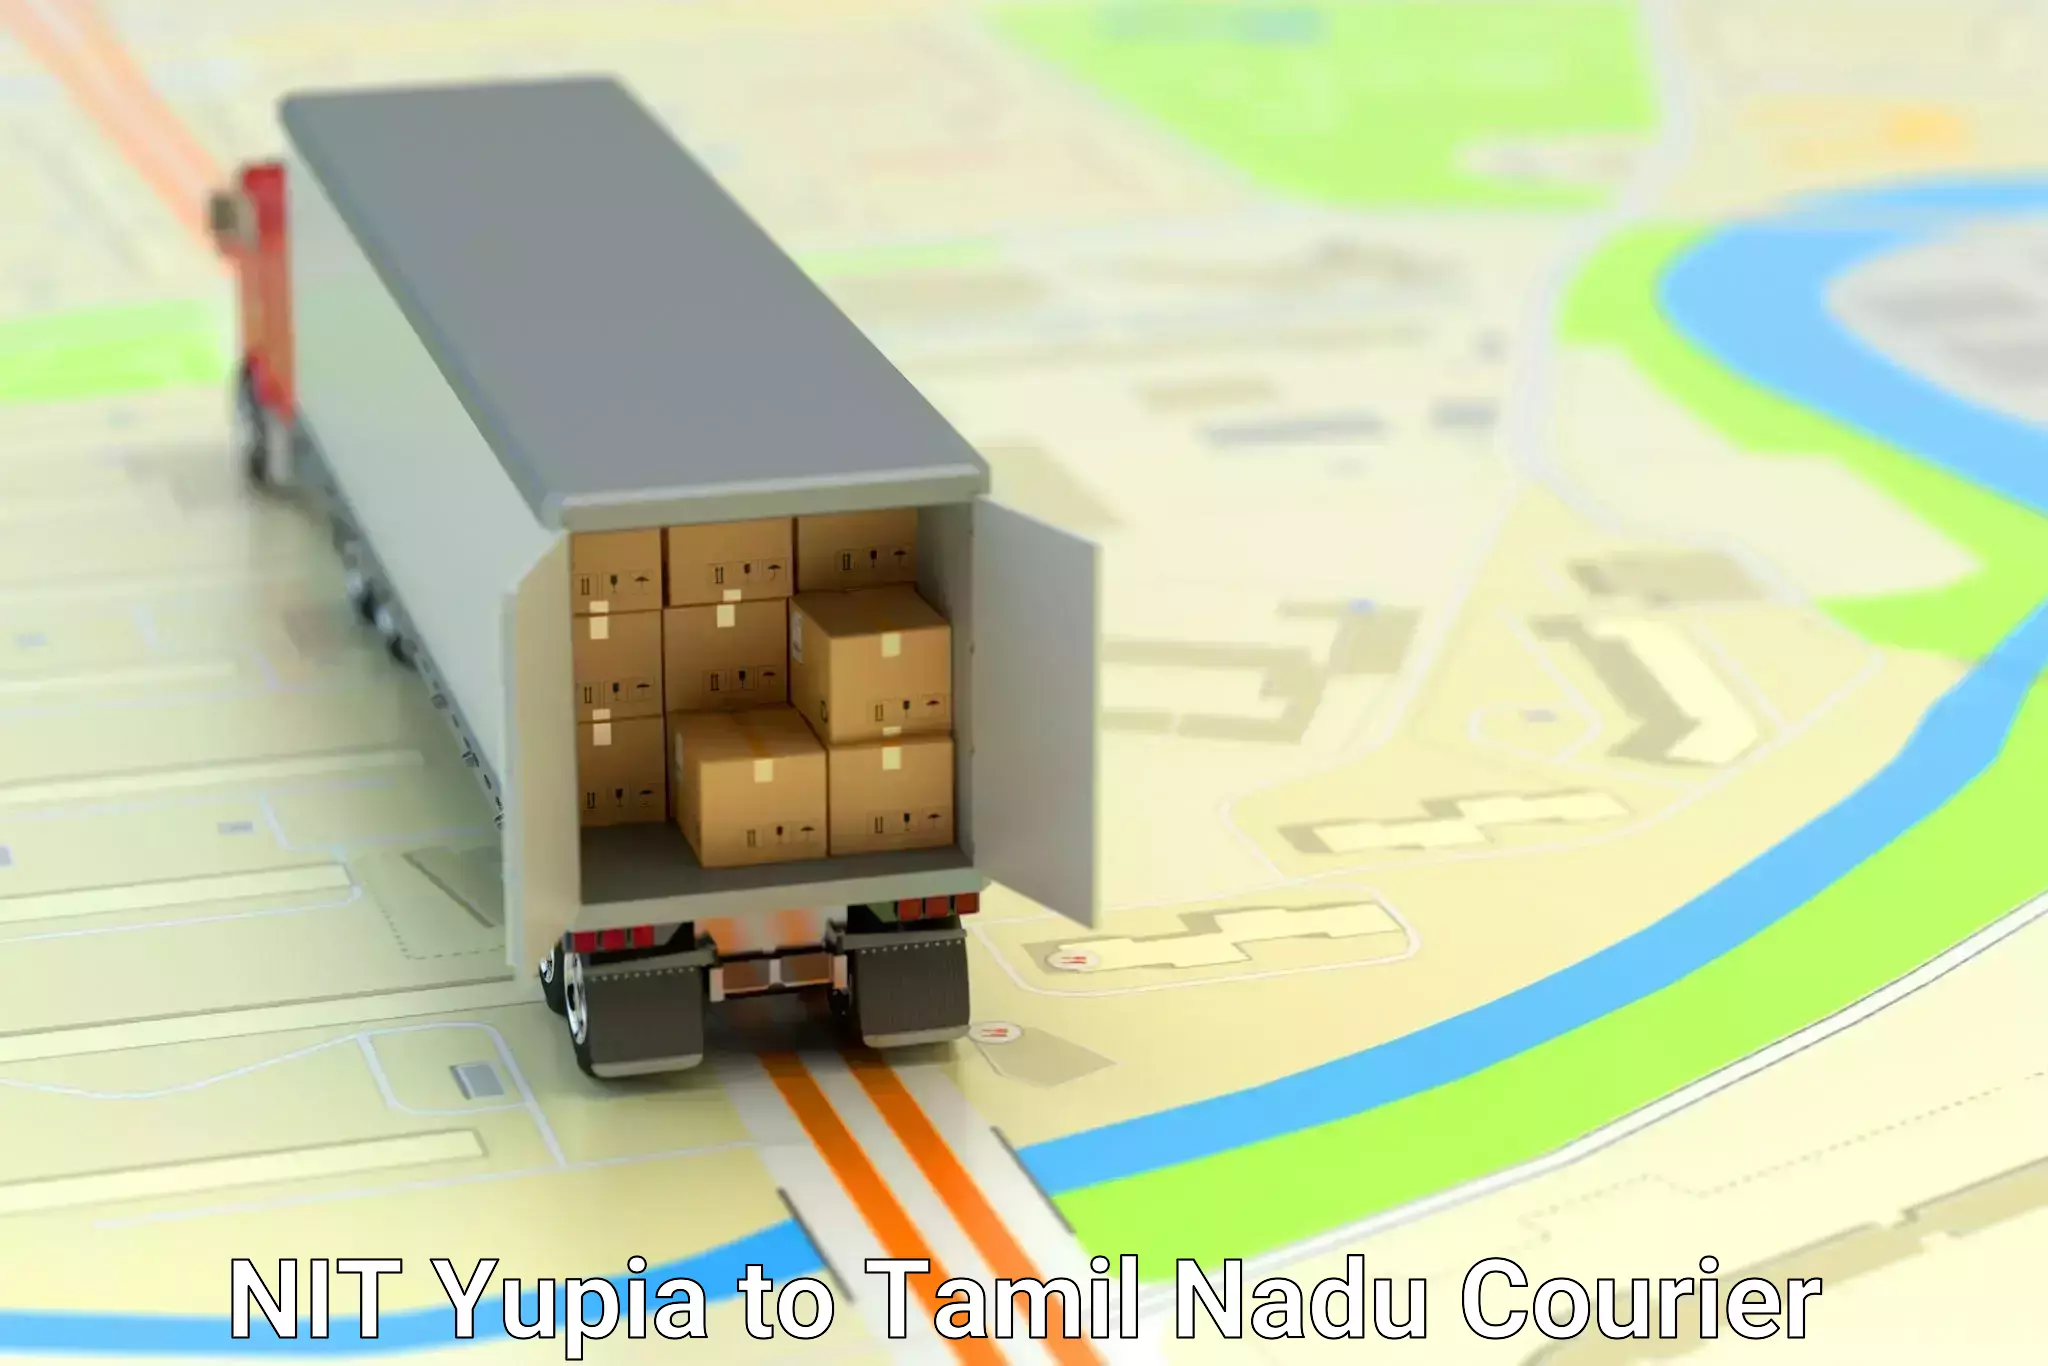 Next-generation courier services NIT Yupia to Tamil Nadu